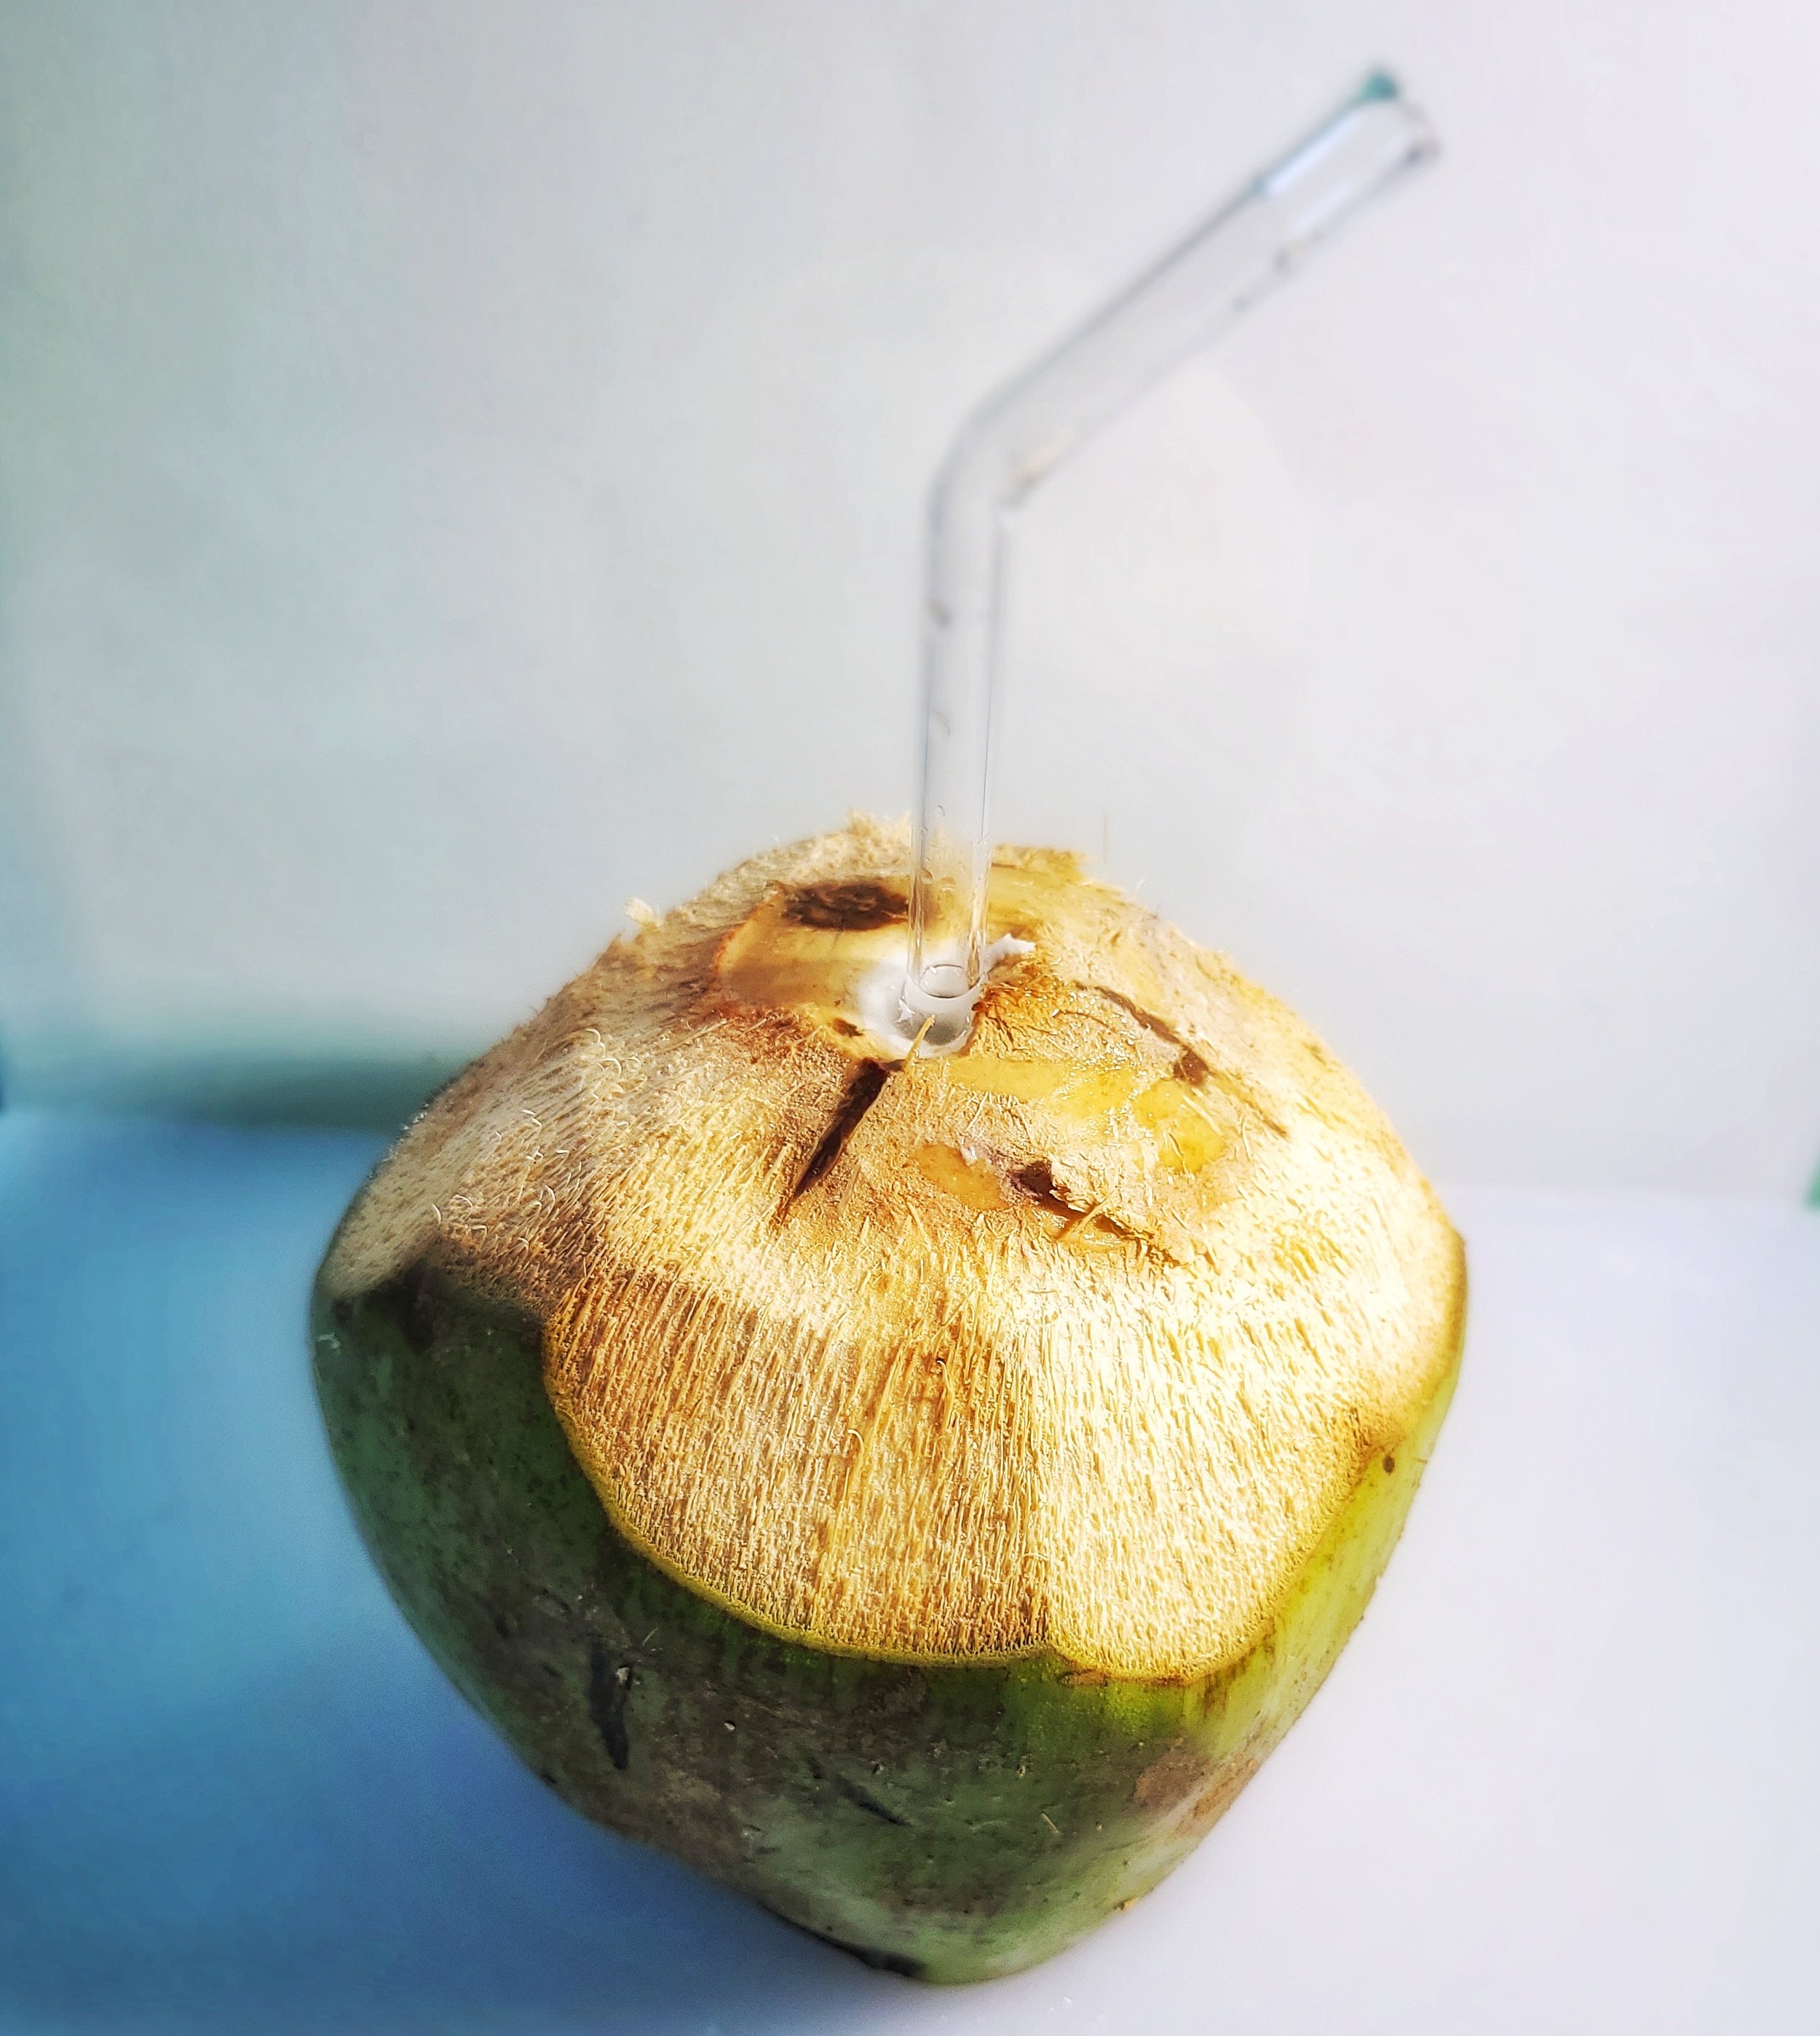 Drink From an Organic Maui Coconut